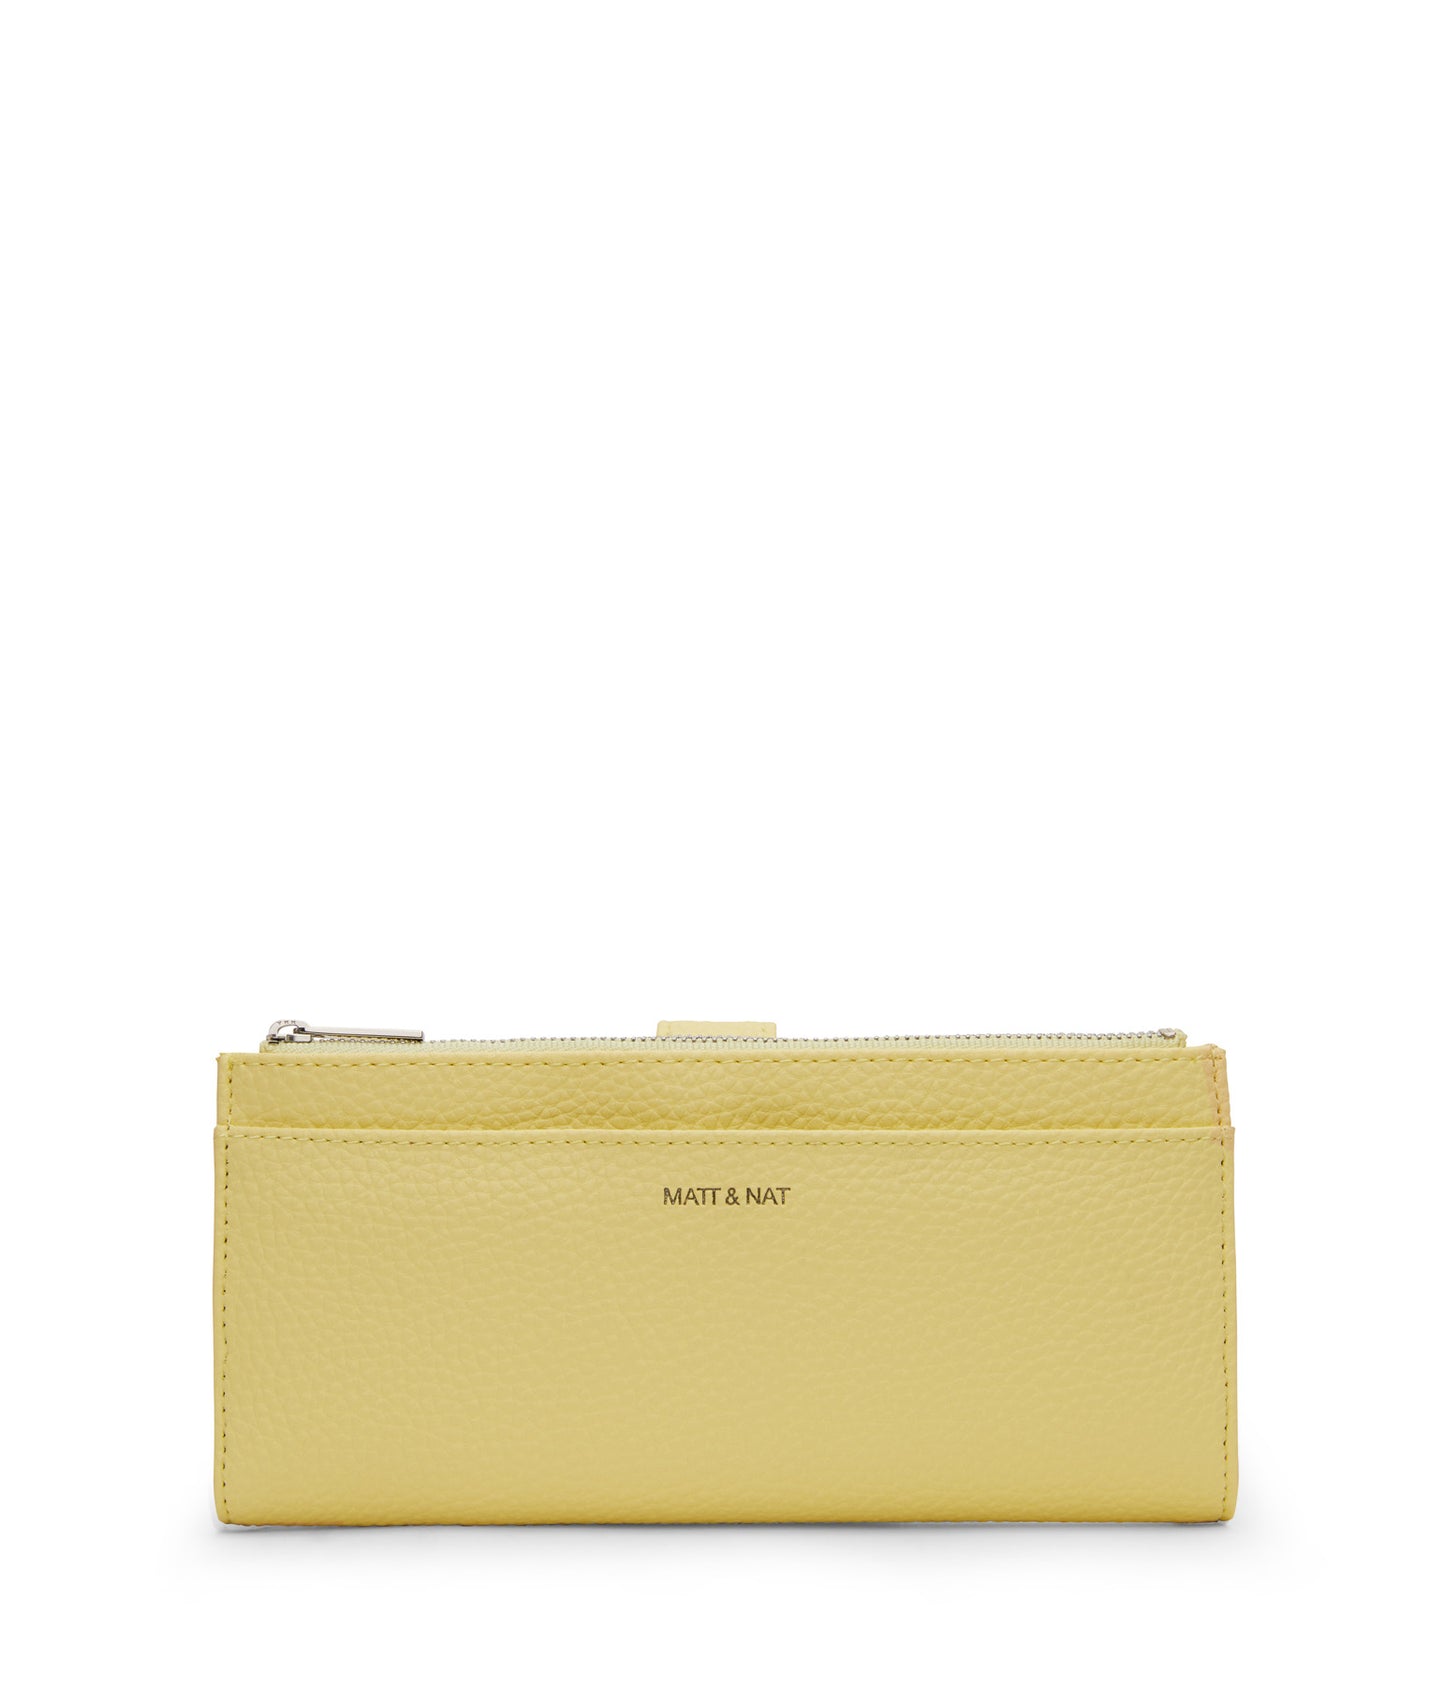 MOTIV Vegan Wallet - Purity | Color: Yellow - variant::daffodil